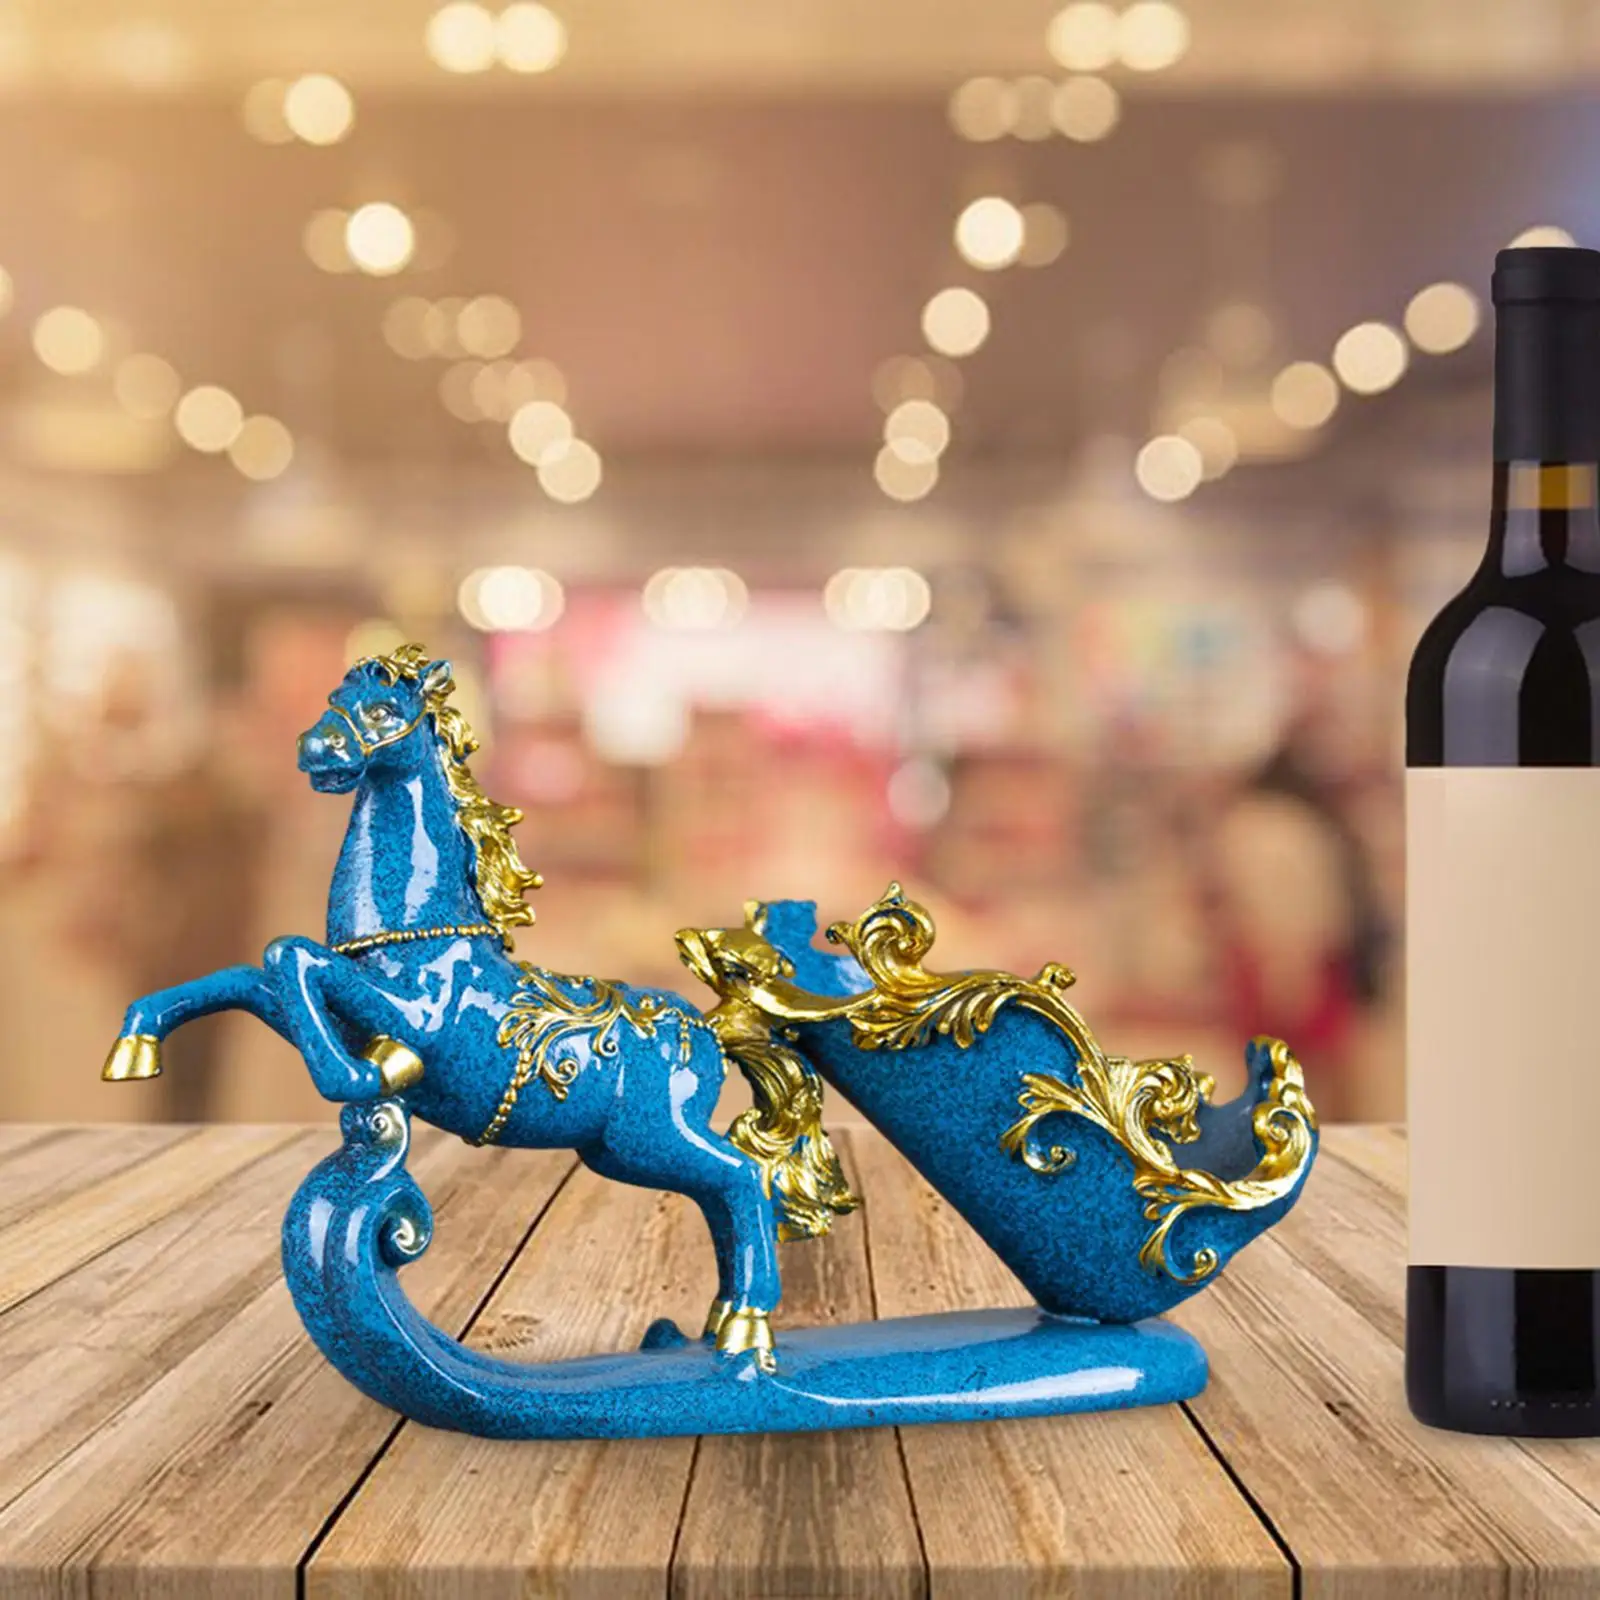 Horse Figurines Bottle Holder Stand Decorative for Tabletop Bar Classic Gift